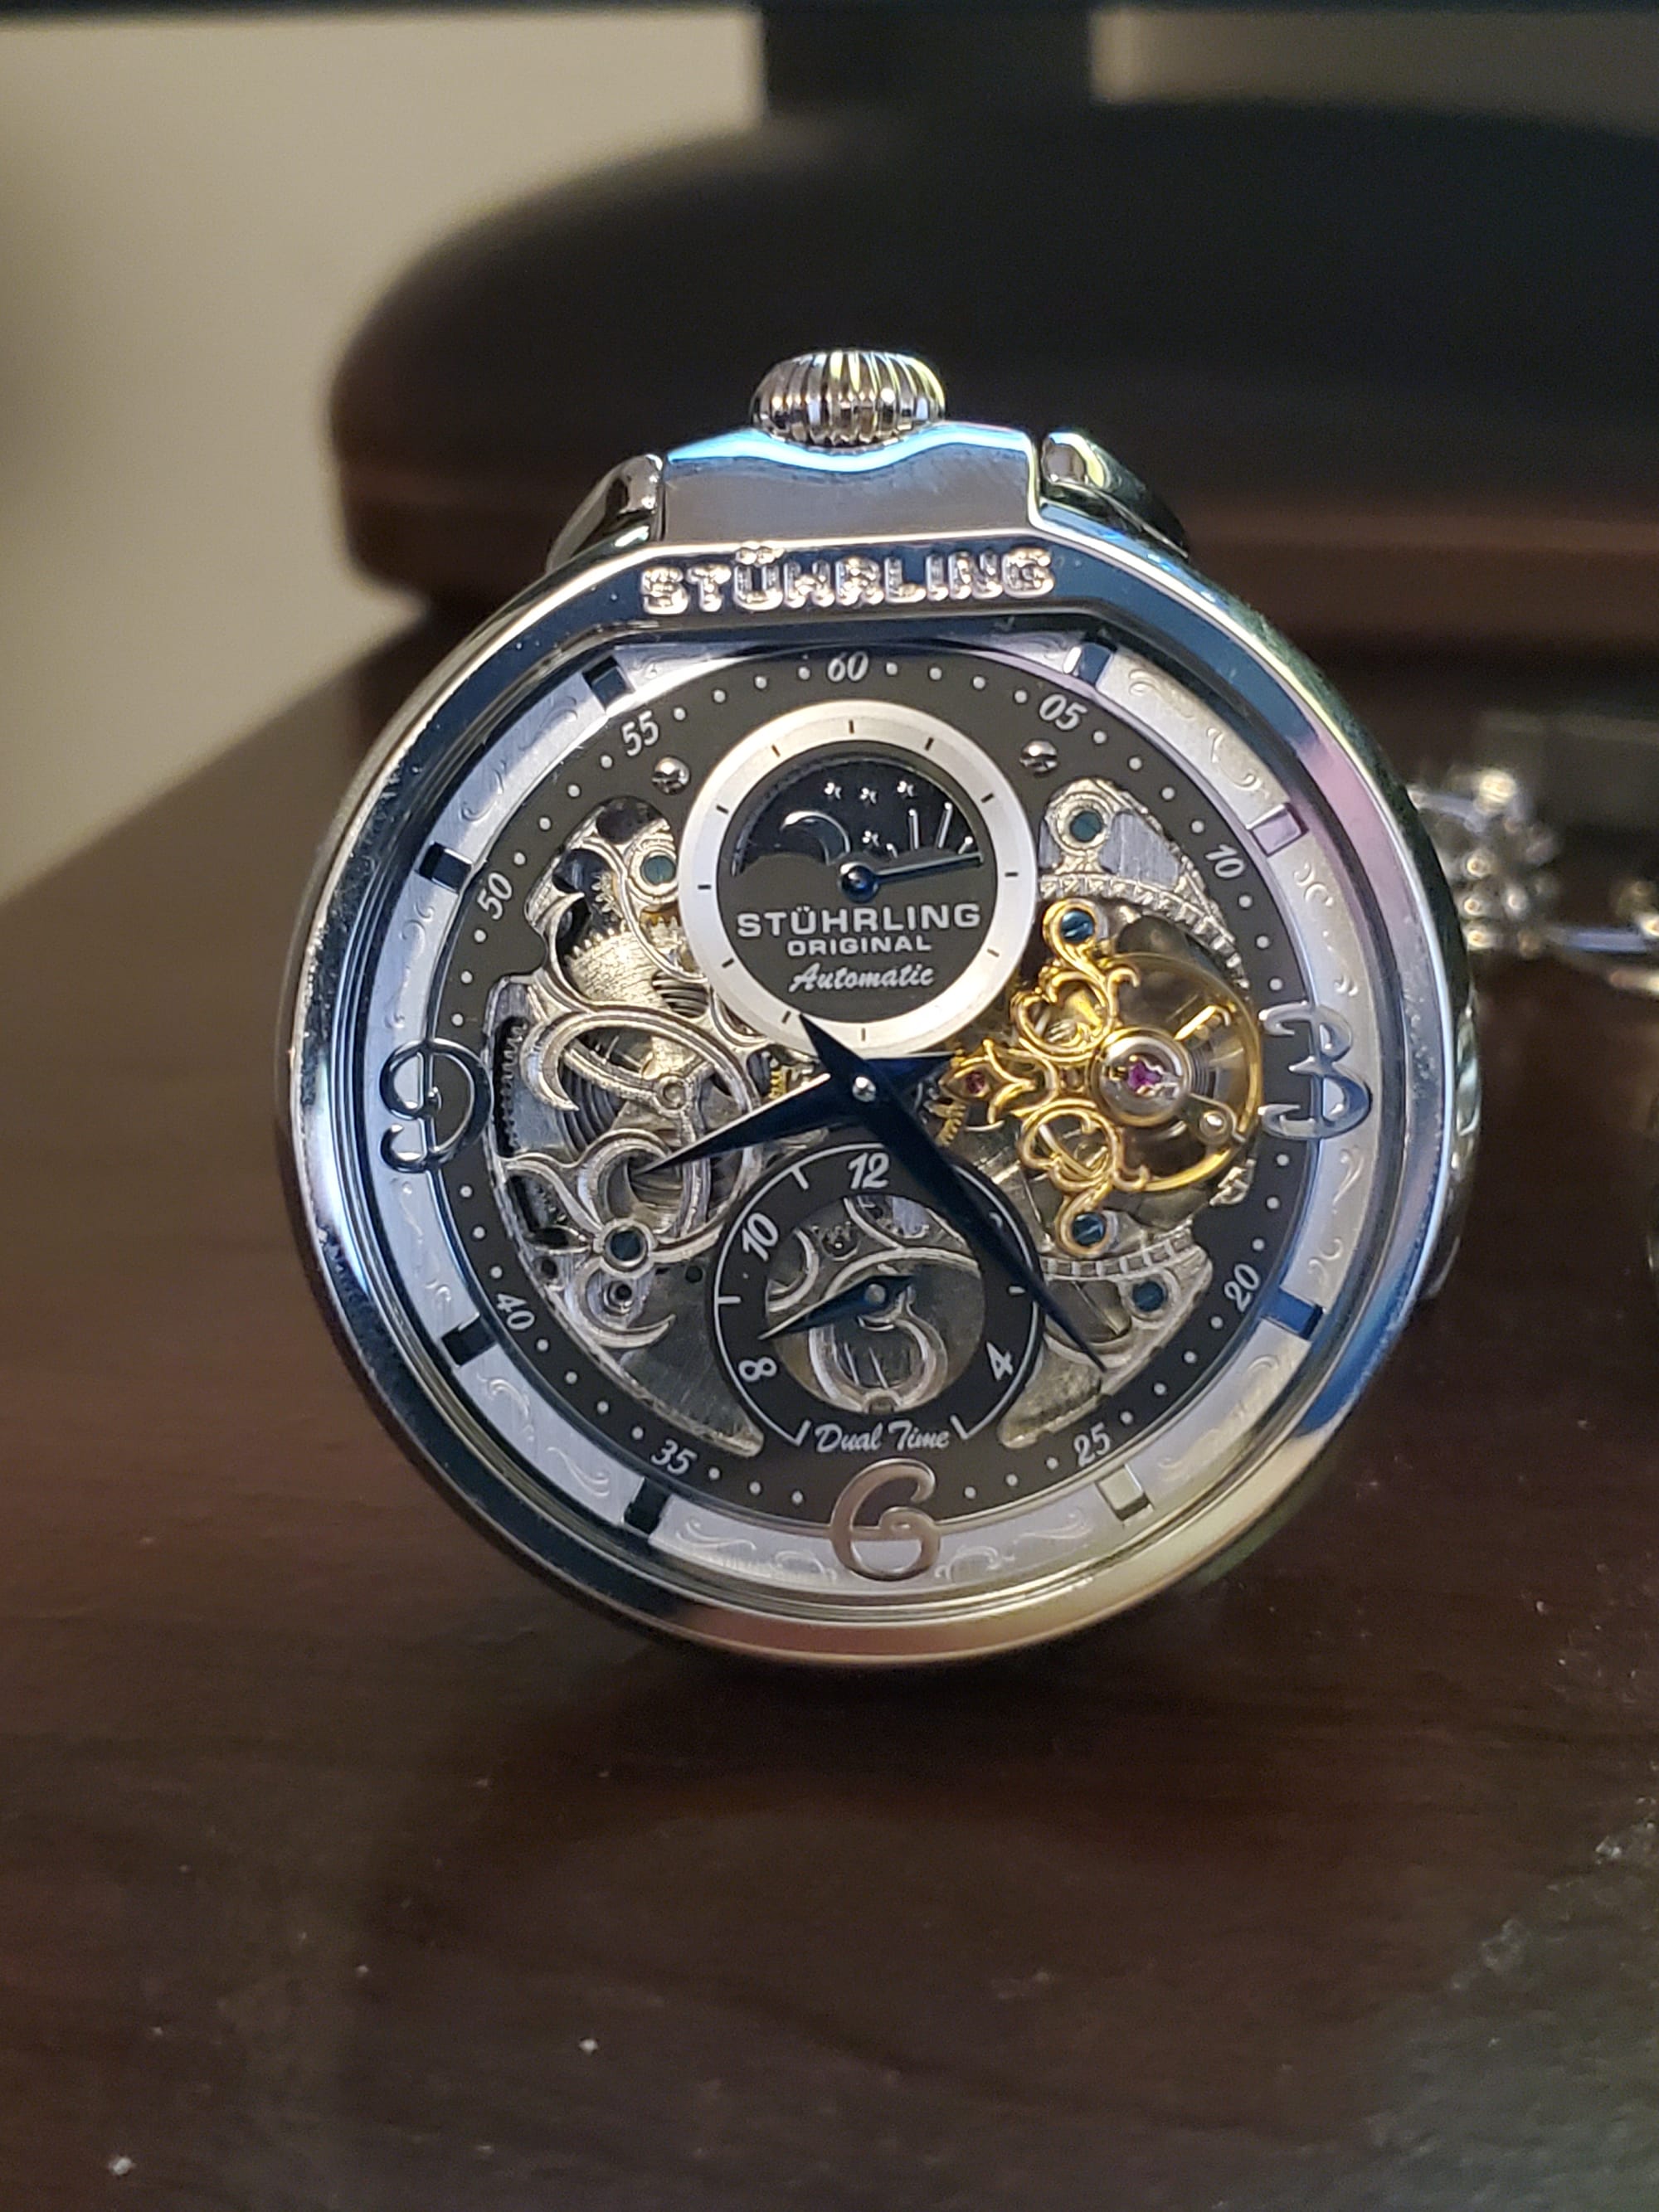 Stuhrling automatic movement pocket watch, jewels visible inside